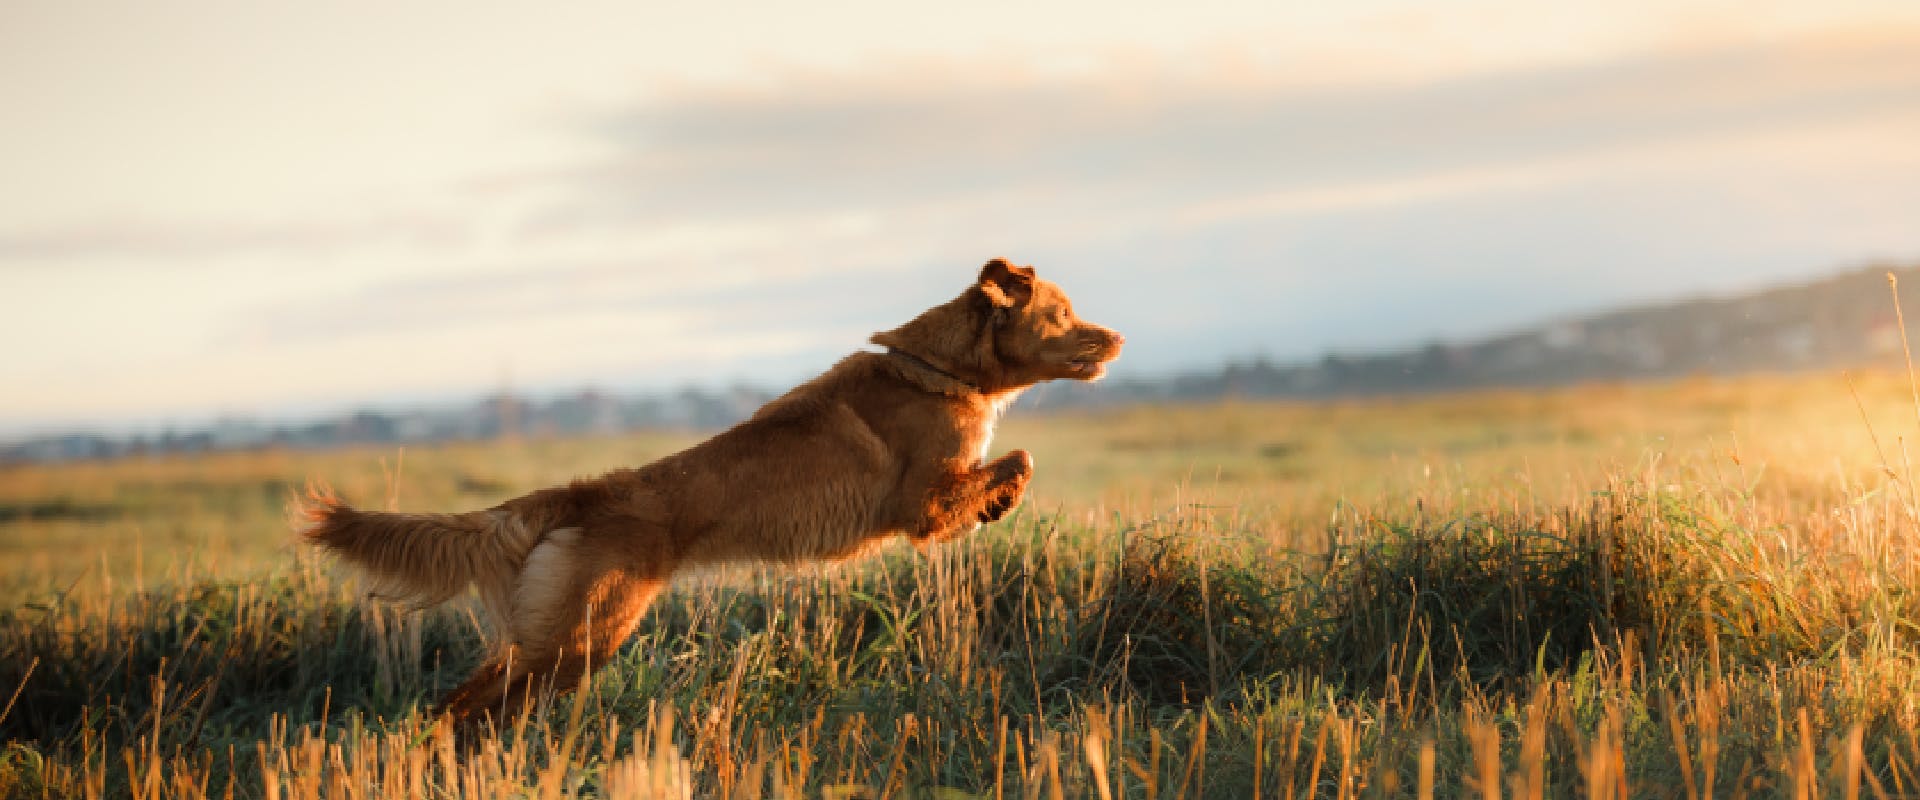 Dog jumping in a field